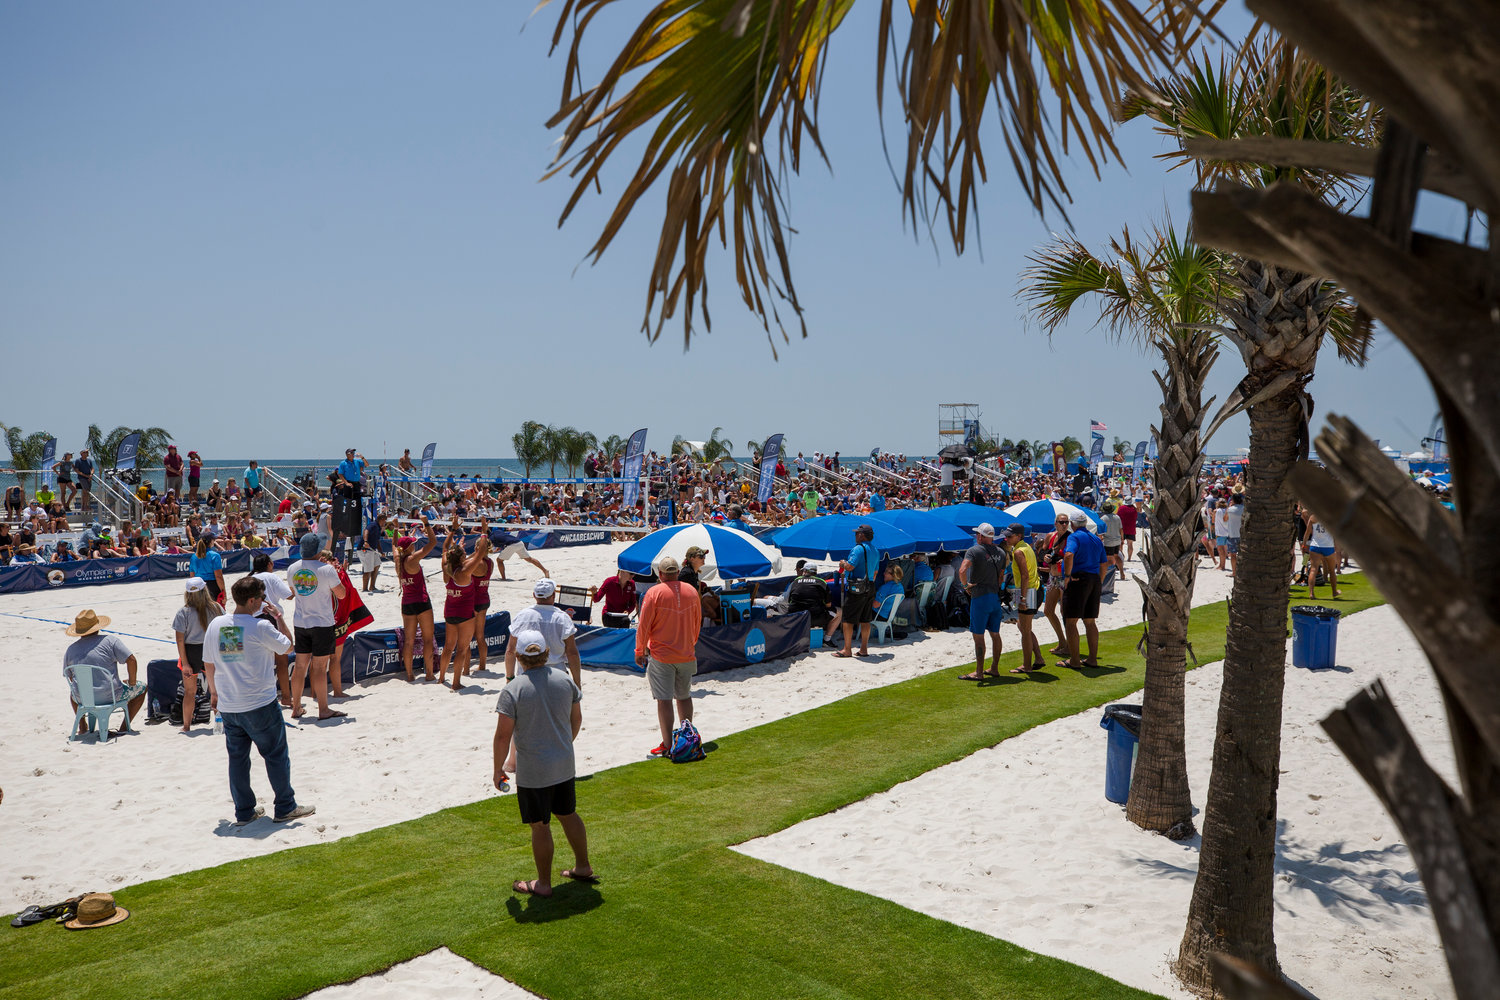 The NCAA beach volleyball championship once again broke its championship weekend attendance at Gulf Place Public Beach in May. It’s just one of the events that have added the month to the busy season for sports tourism on Pleasure Island.